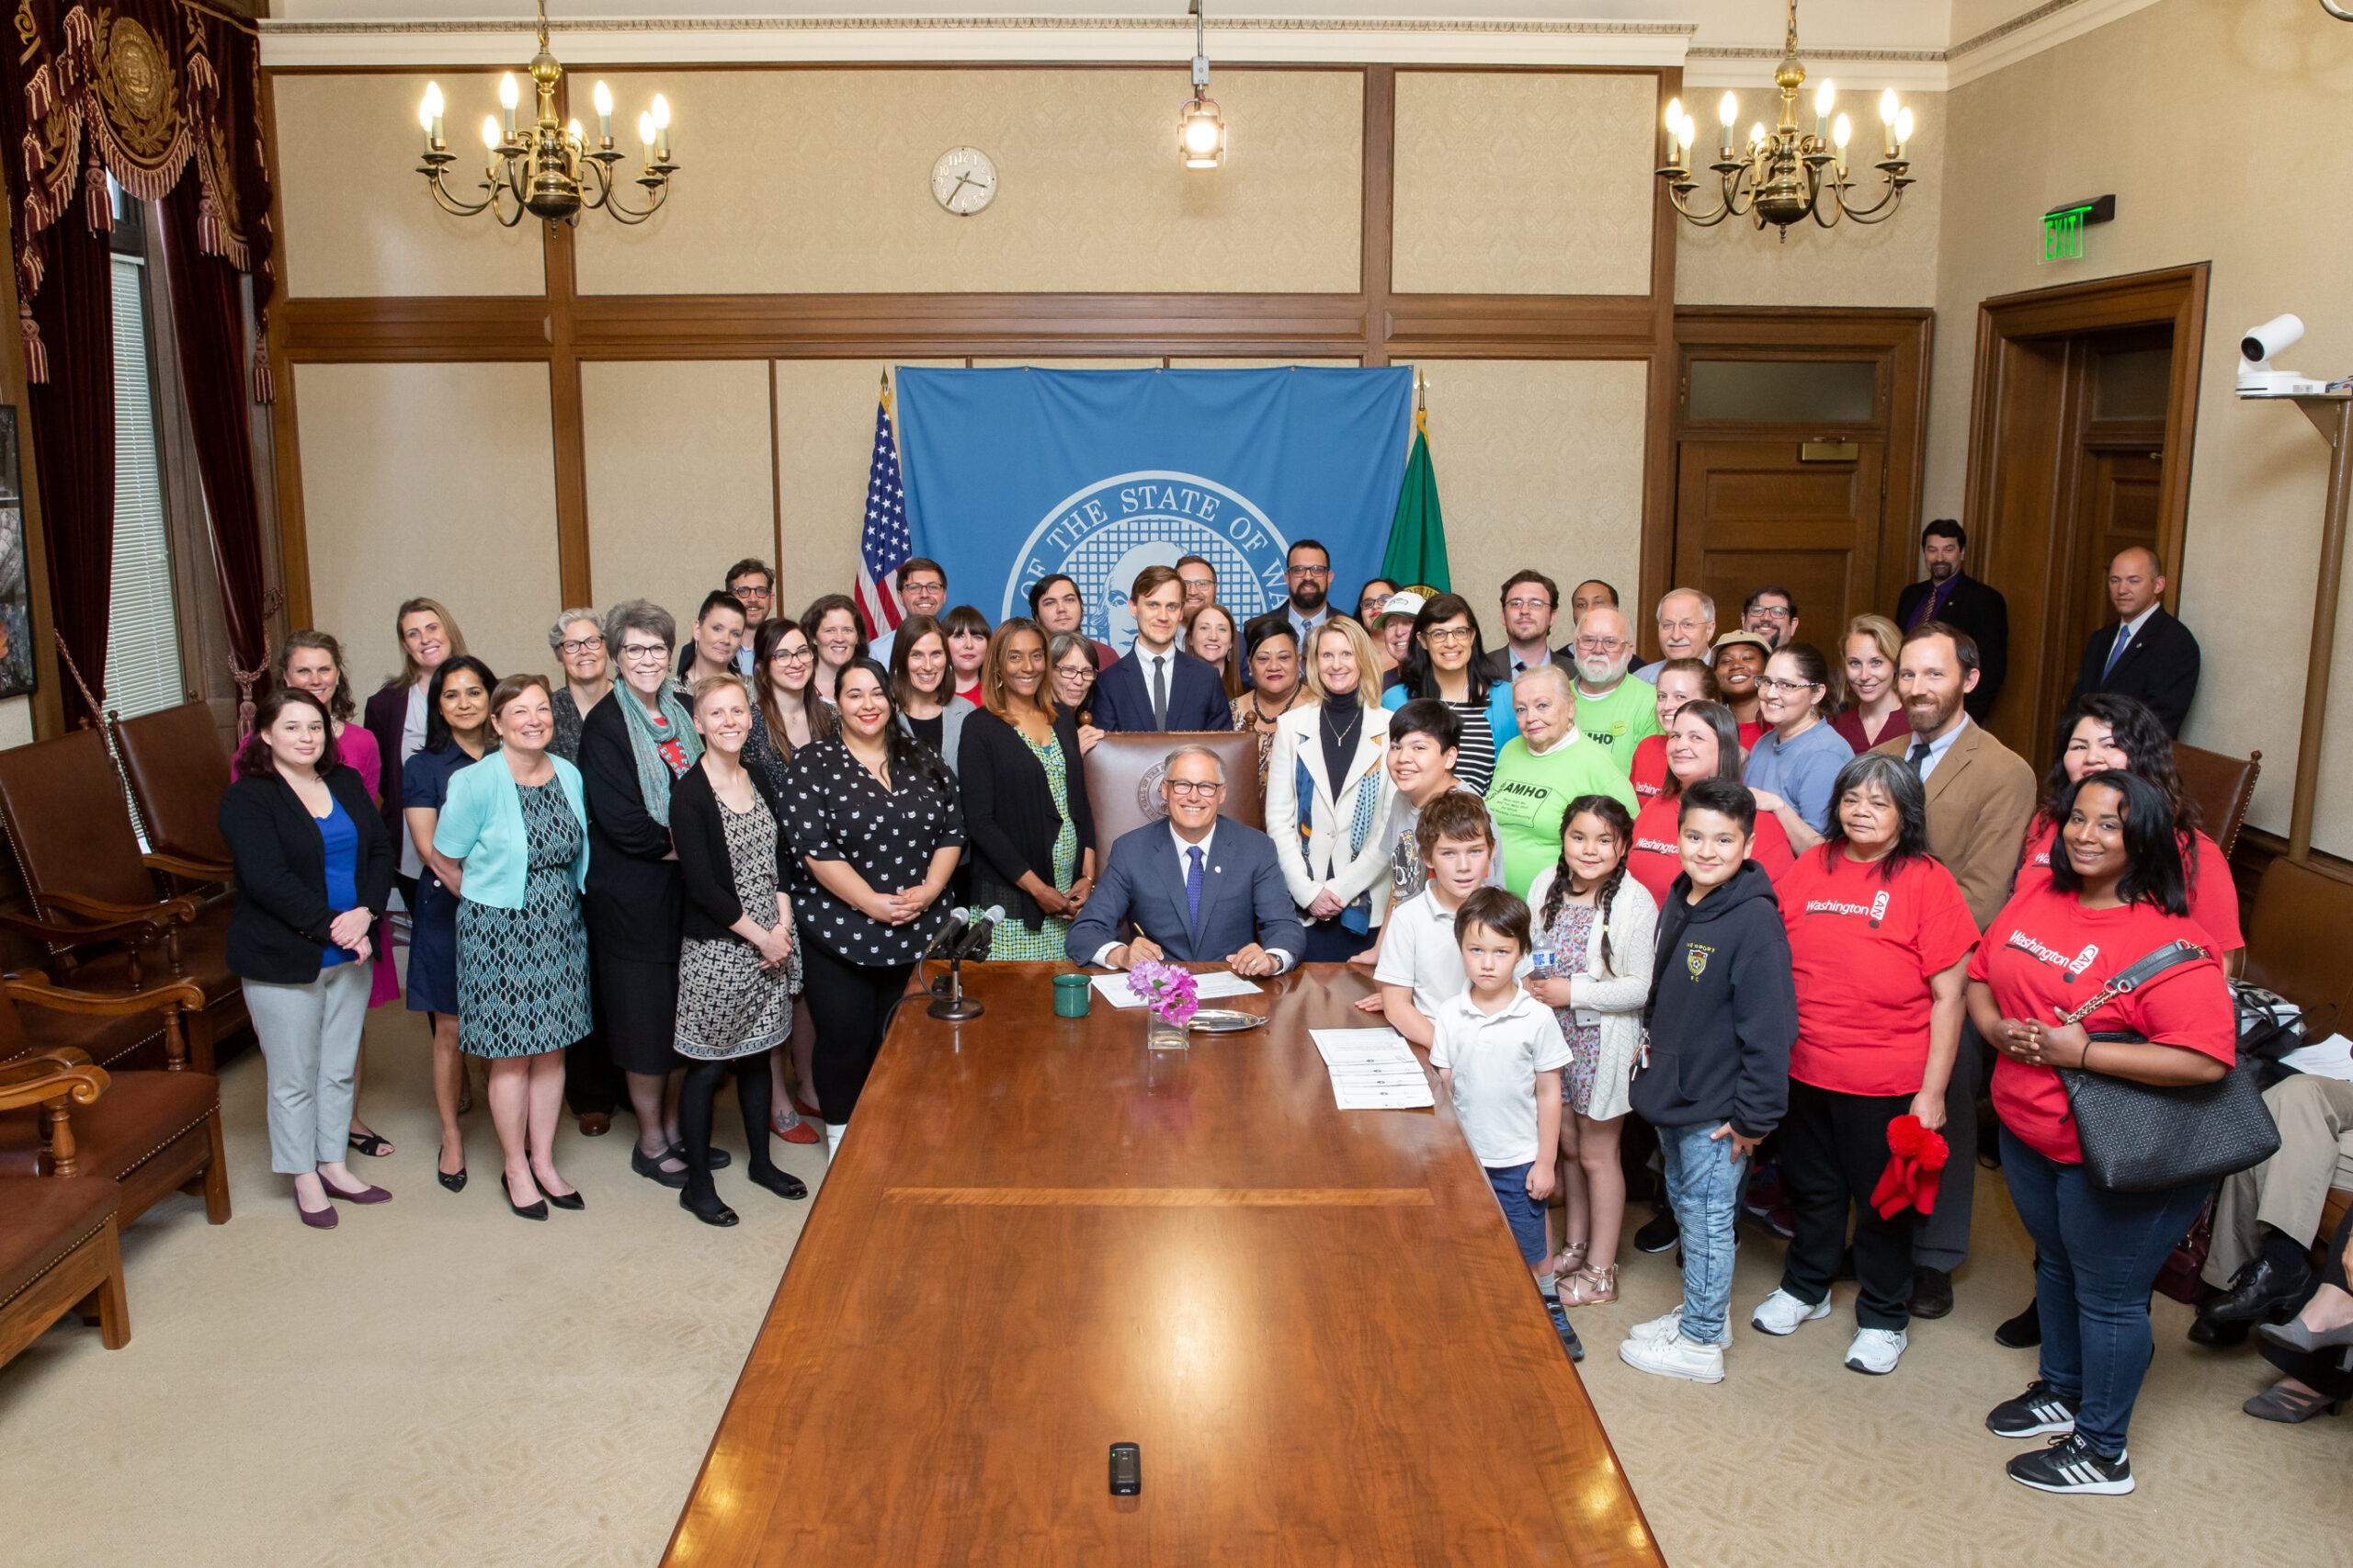 Gov. Inslee signs Engrossed Substitute Senate Bill No. 5600, May 9, 2019. Relating to residential tenant protections. Primary Sponsor: Patty Kuderer. Tim Thomas stands left of the Washington flag.